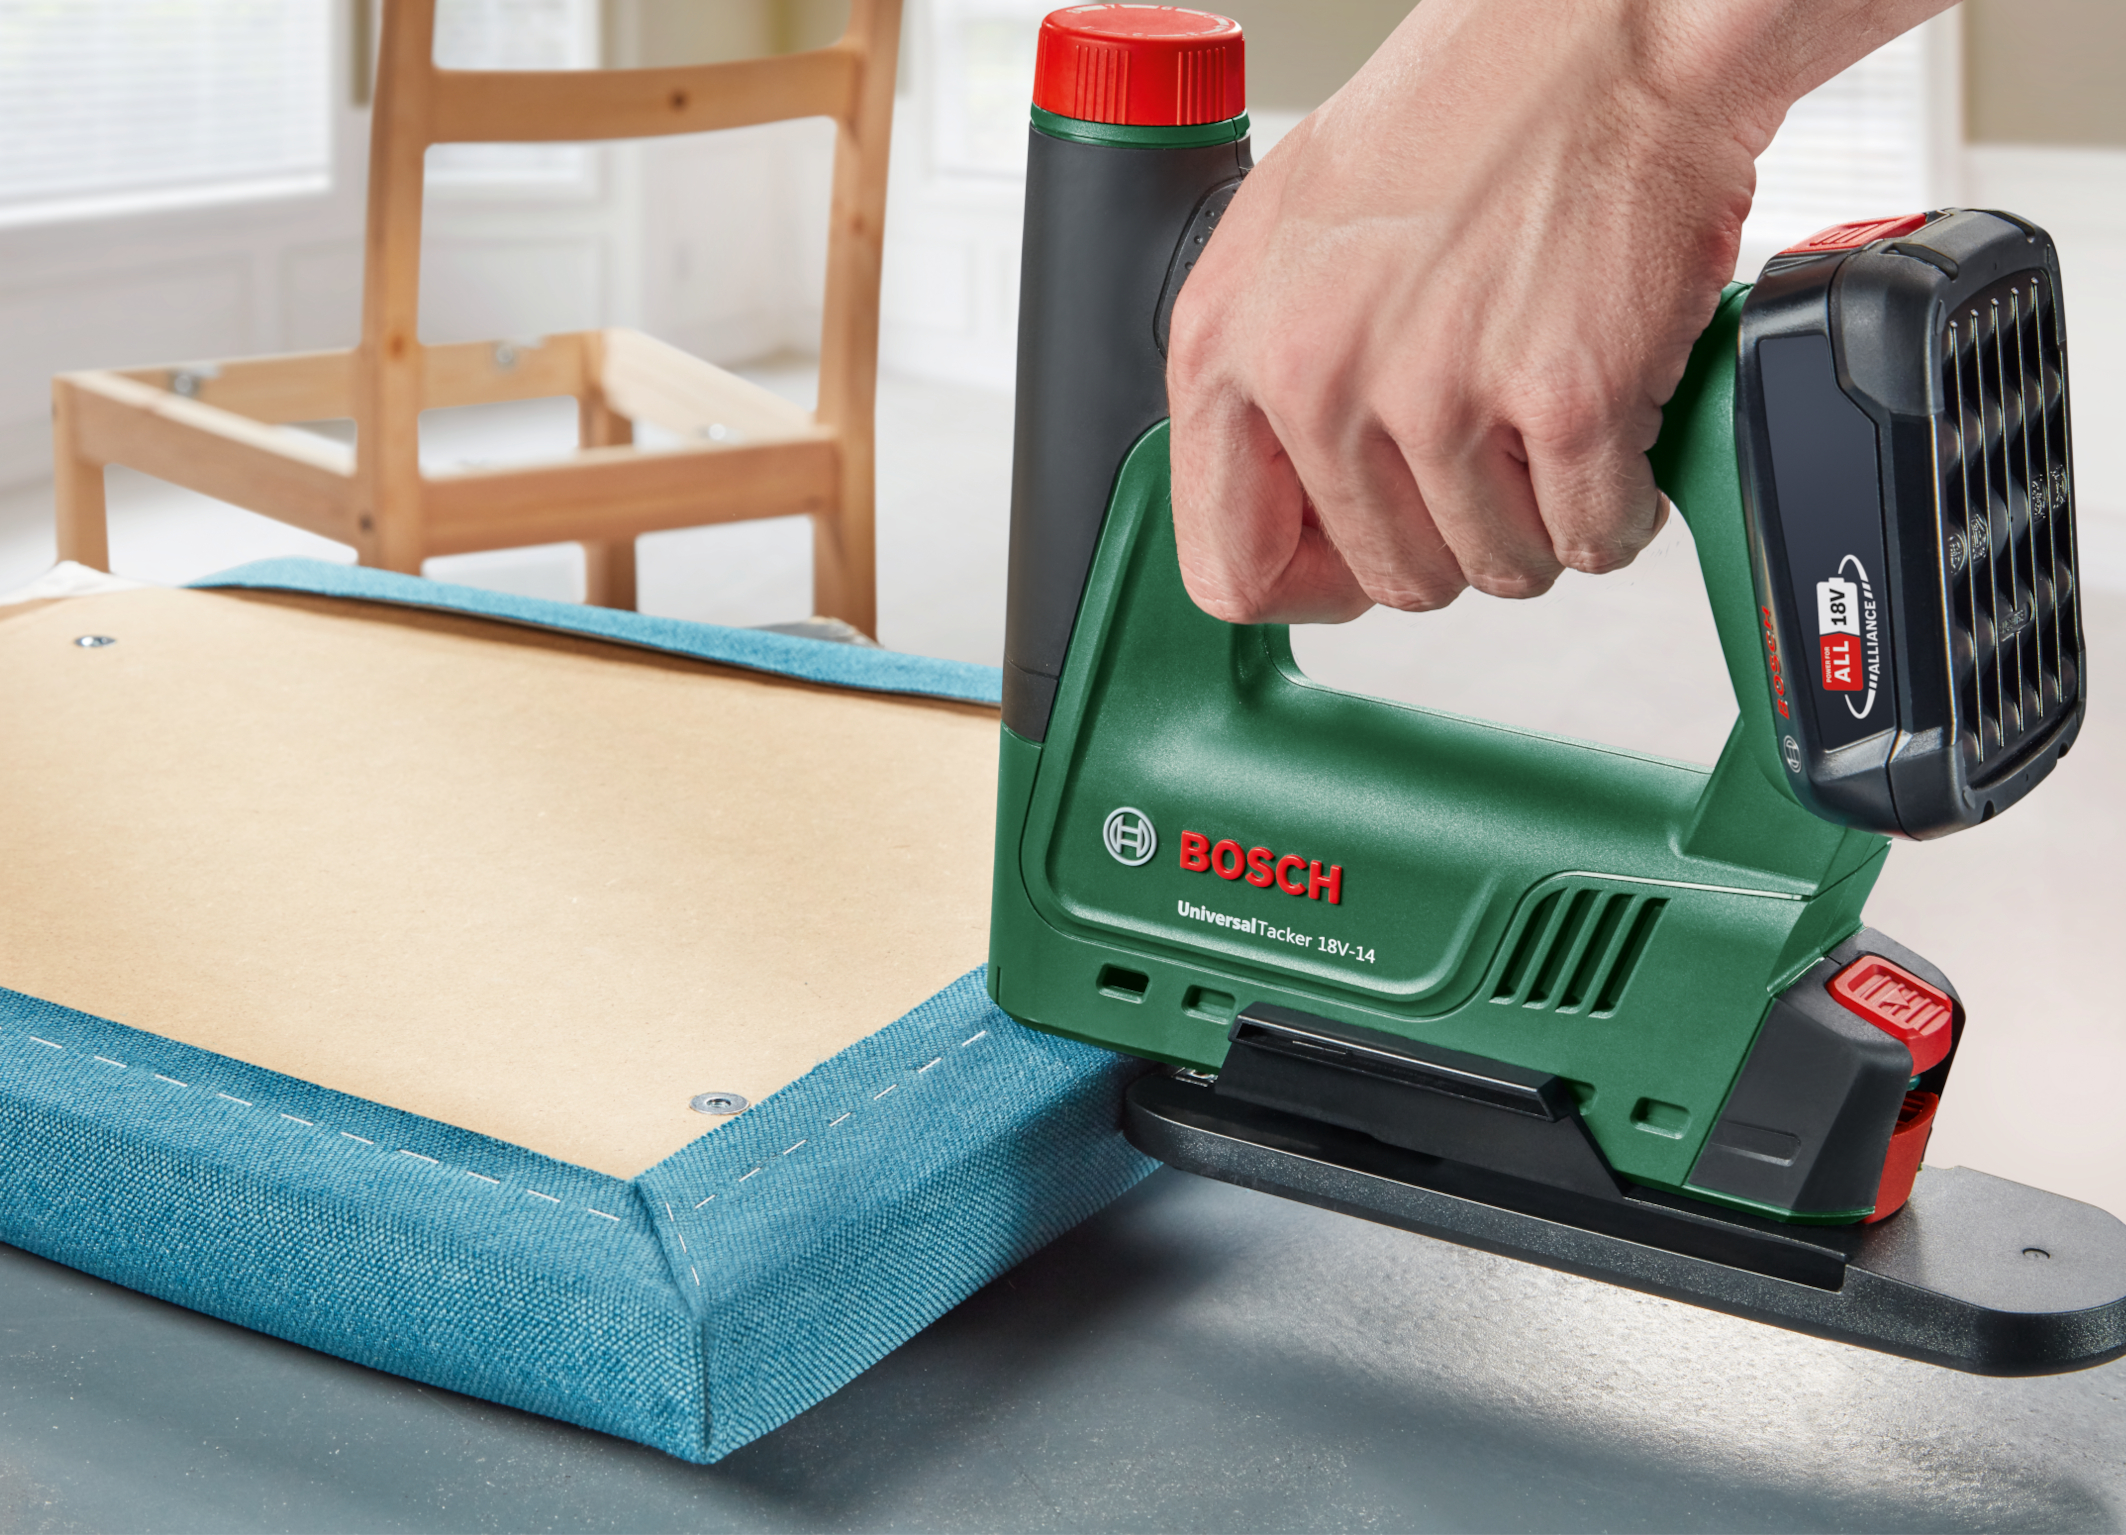 Trottoir krekel Aardappelen Powerful addition to the '18V Power for All System': First 18V cordless  tacker from Bosch for DIYers - Bosch Media Service